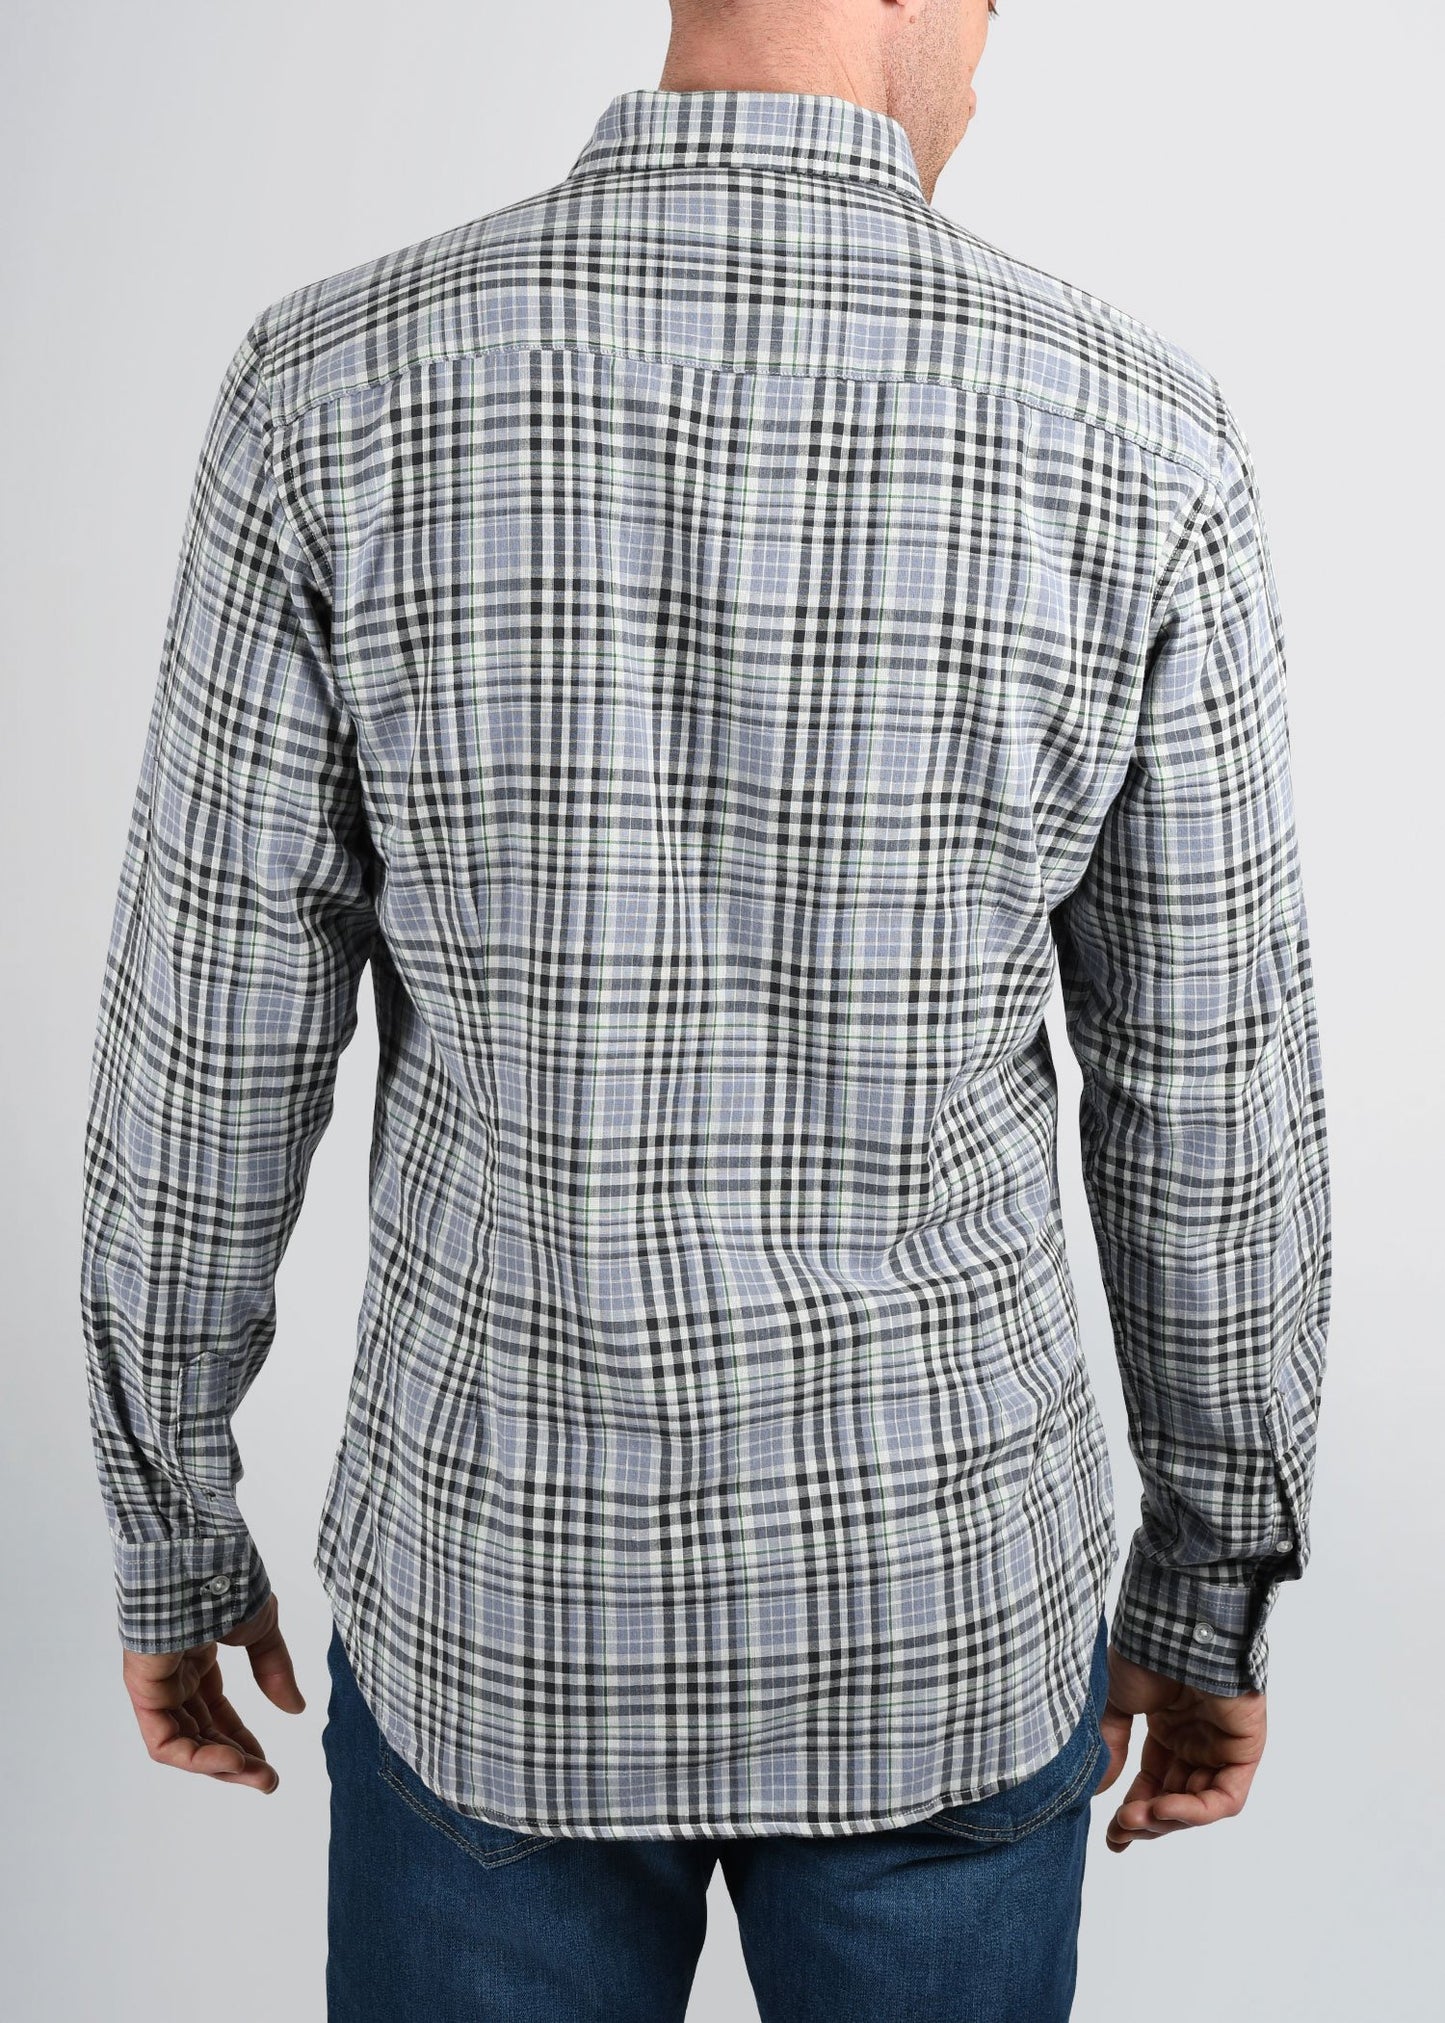 american-tall-mens-double-weave-greyplaid-back